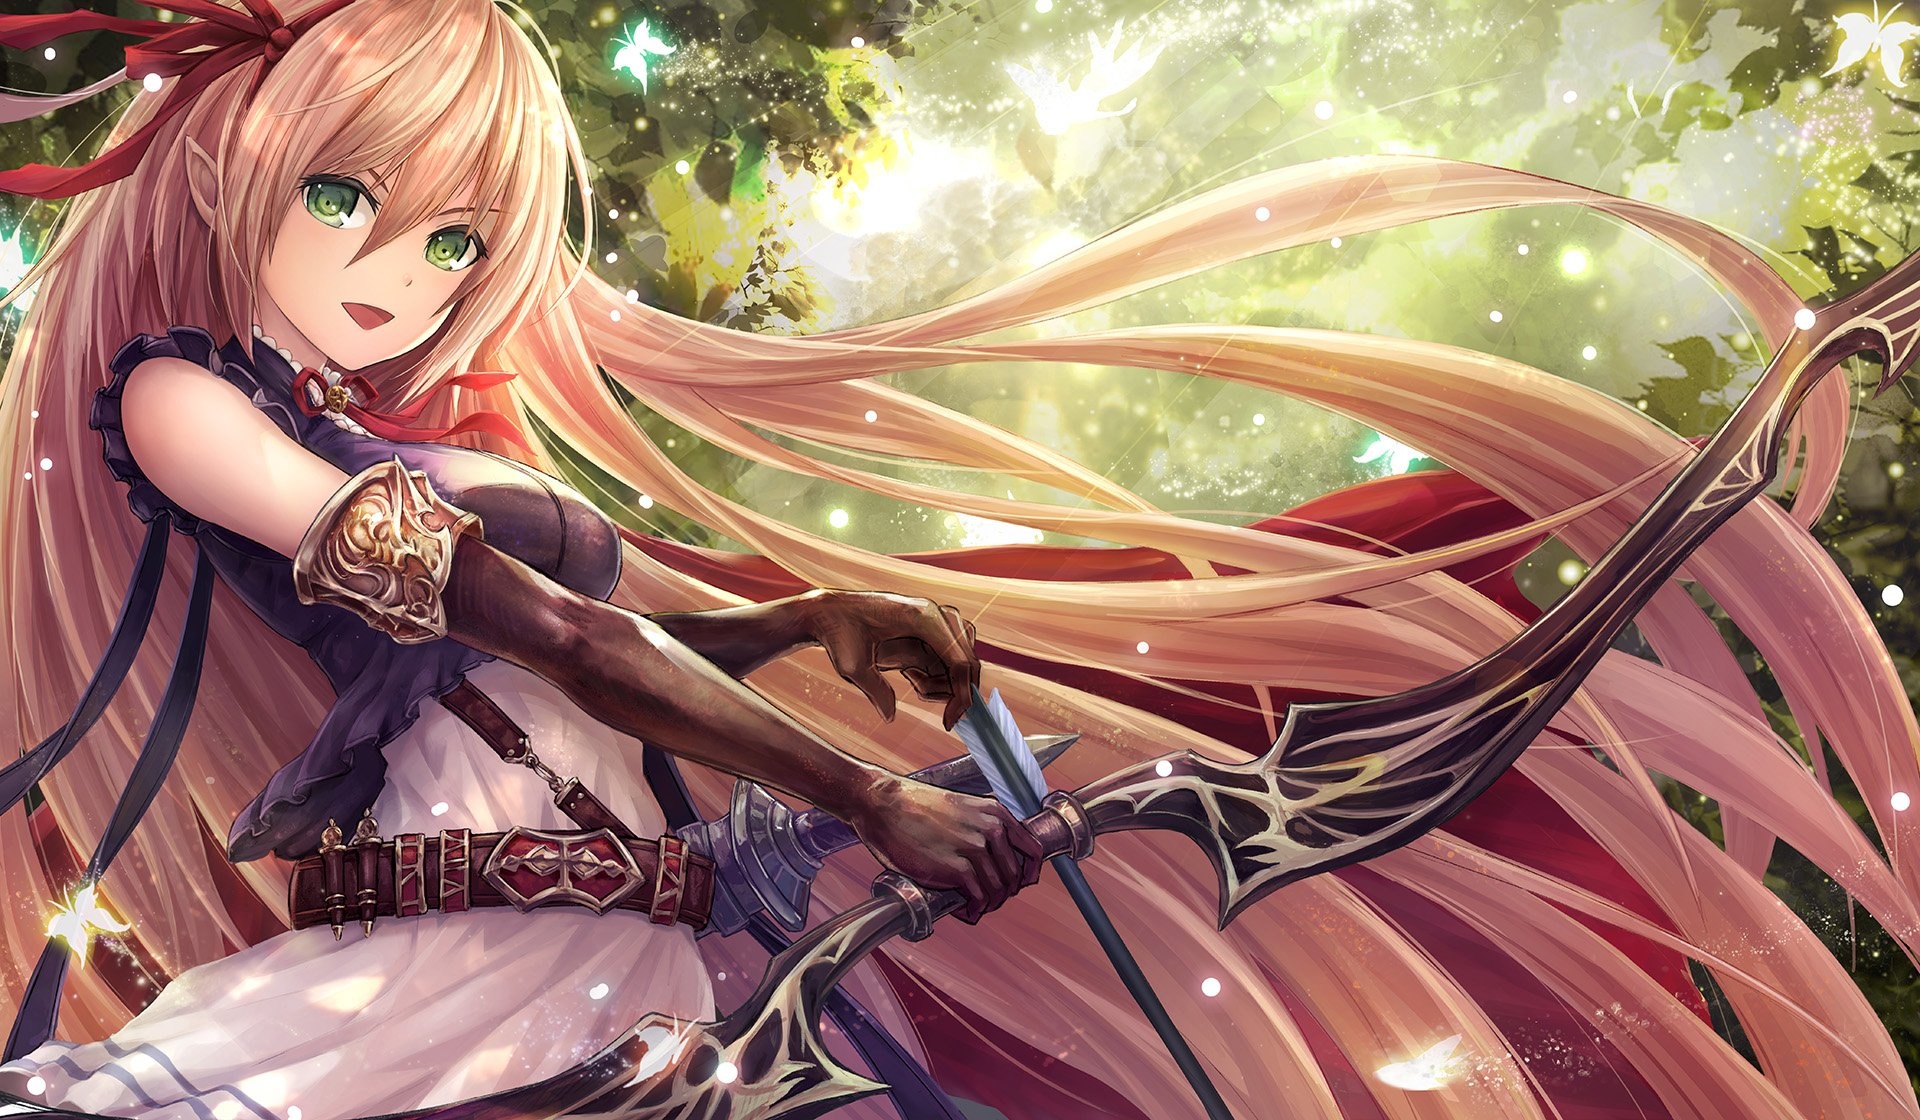 Shadowverse anime, High-definition wallpapers, Anime art, Dark and captivating, 1920x1120 HD Desktop